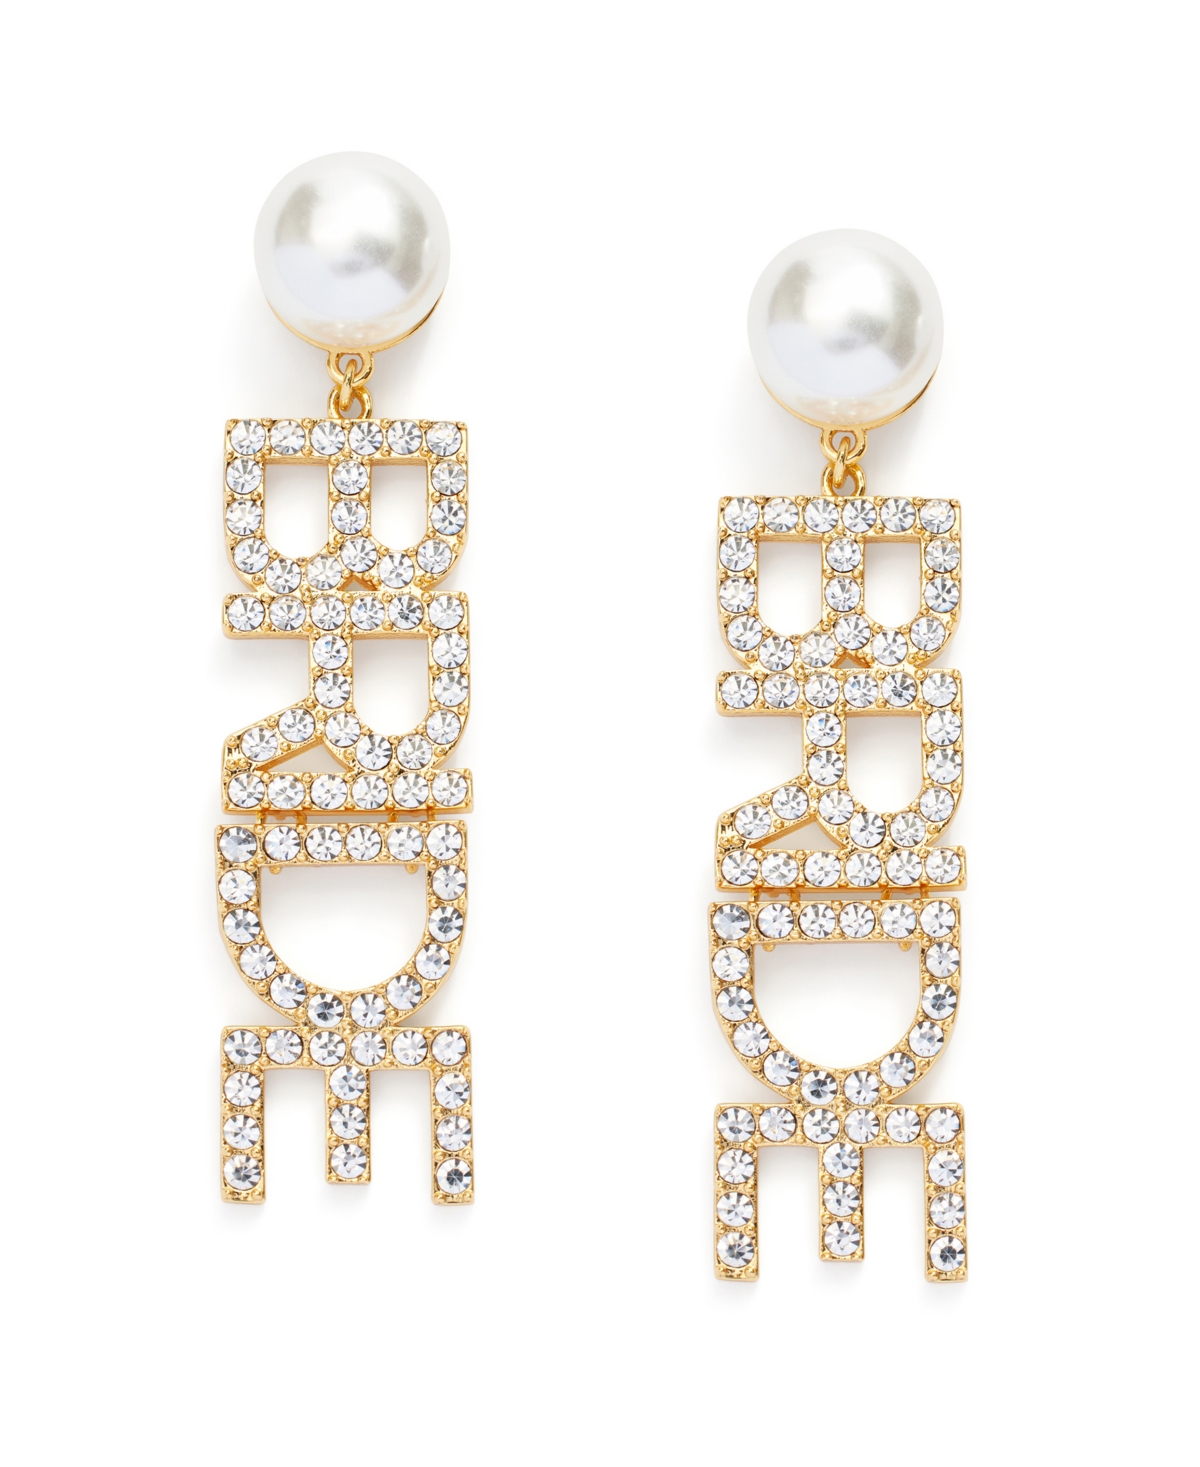 Kleinfeld Faux Stone Pave Bride Statement Drop Earrings In Crystal,gold